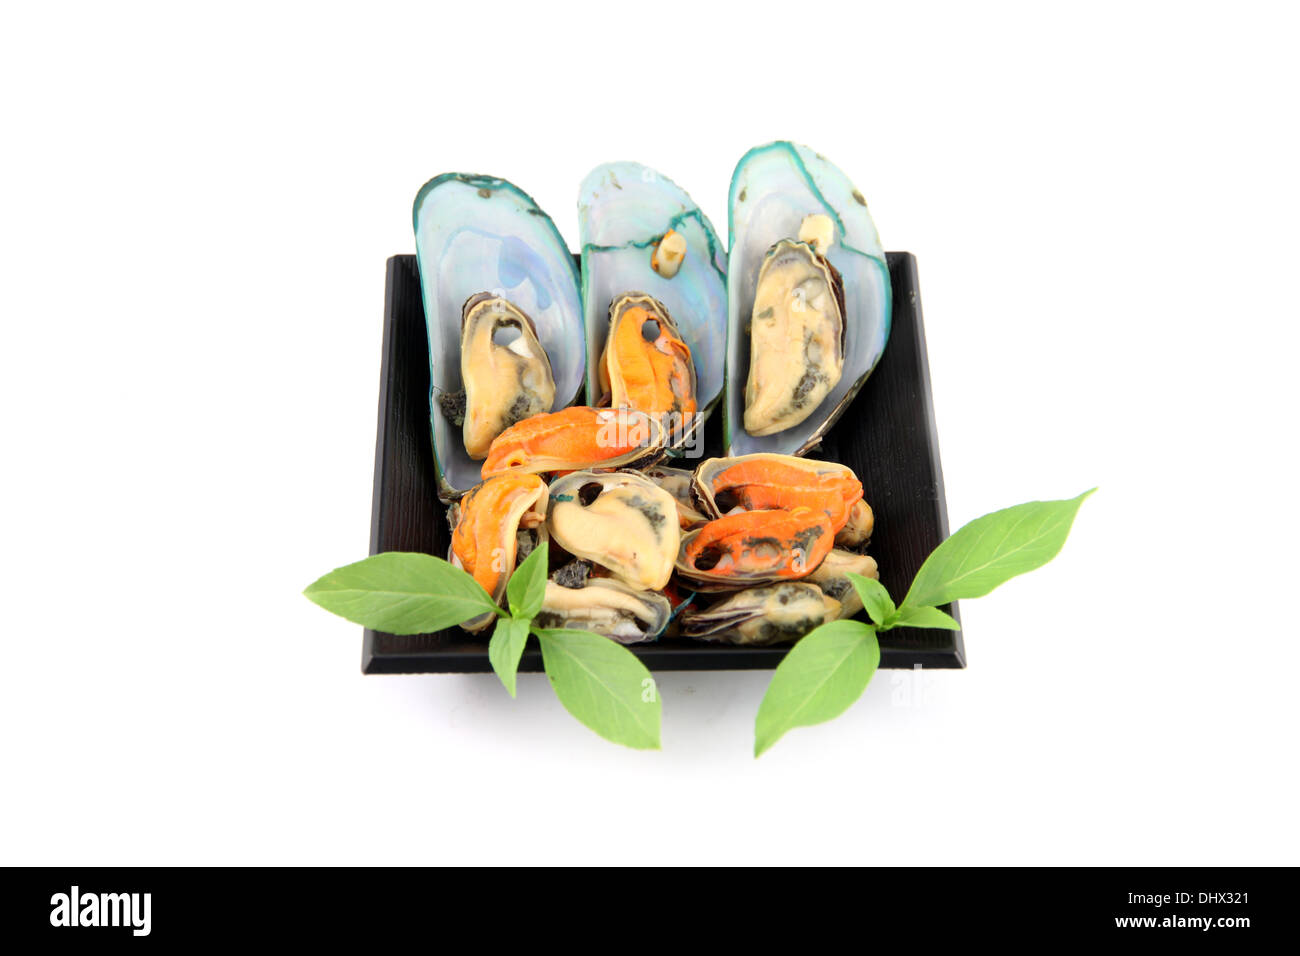 Mussels on black dish and vegetables in dish as well on white background. Stock Photo